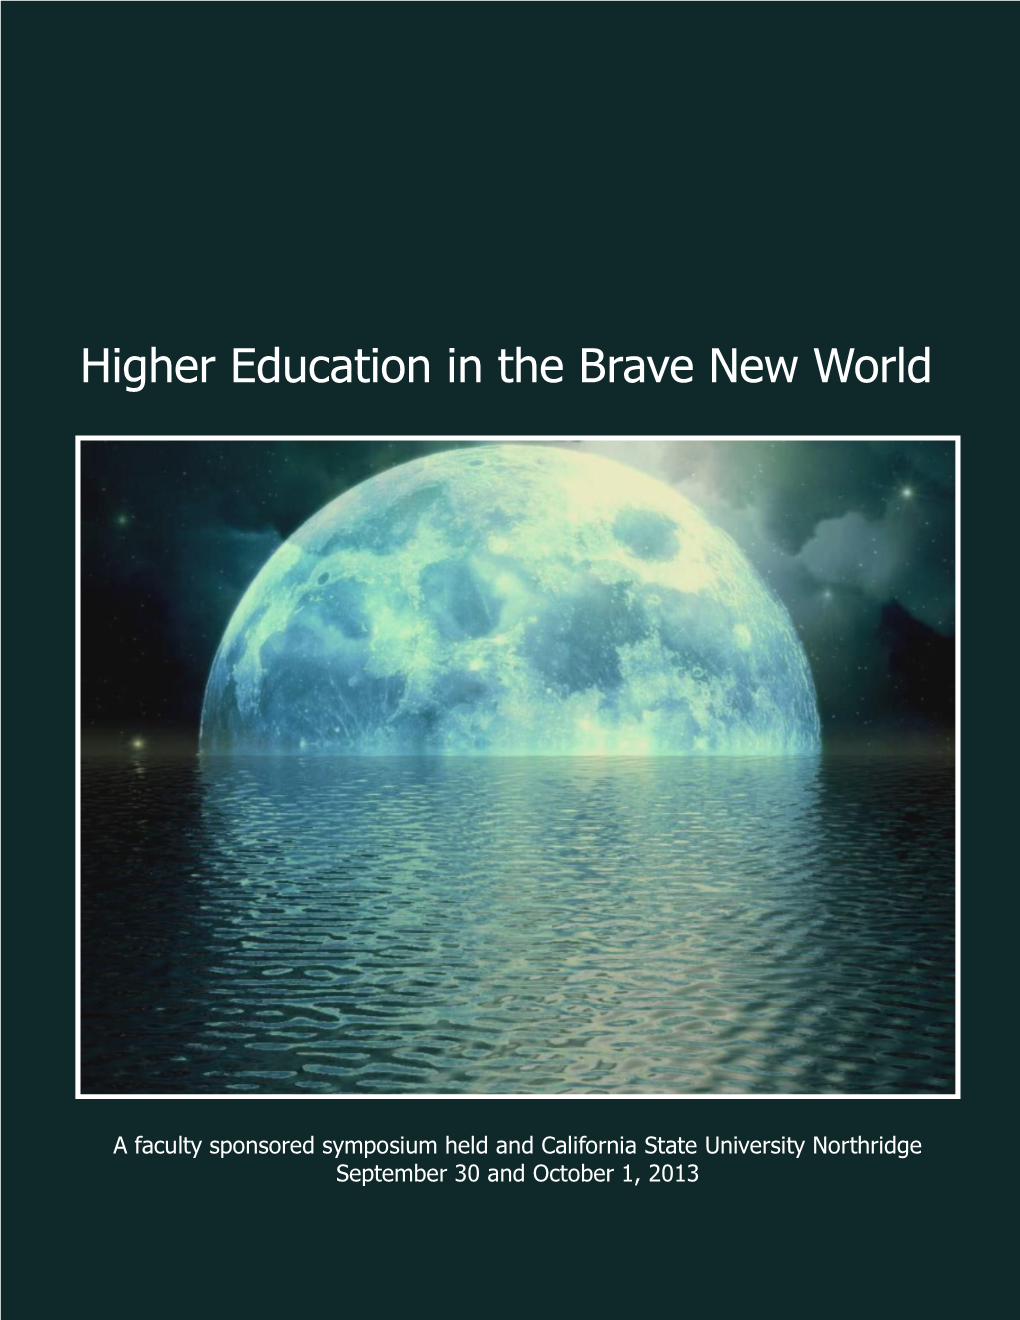 Higher Education in the Brave New World